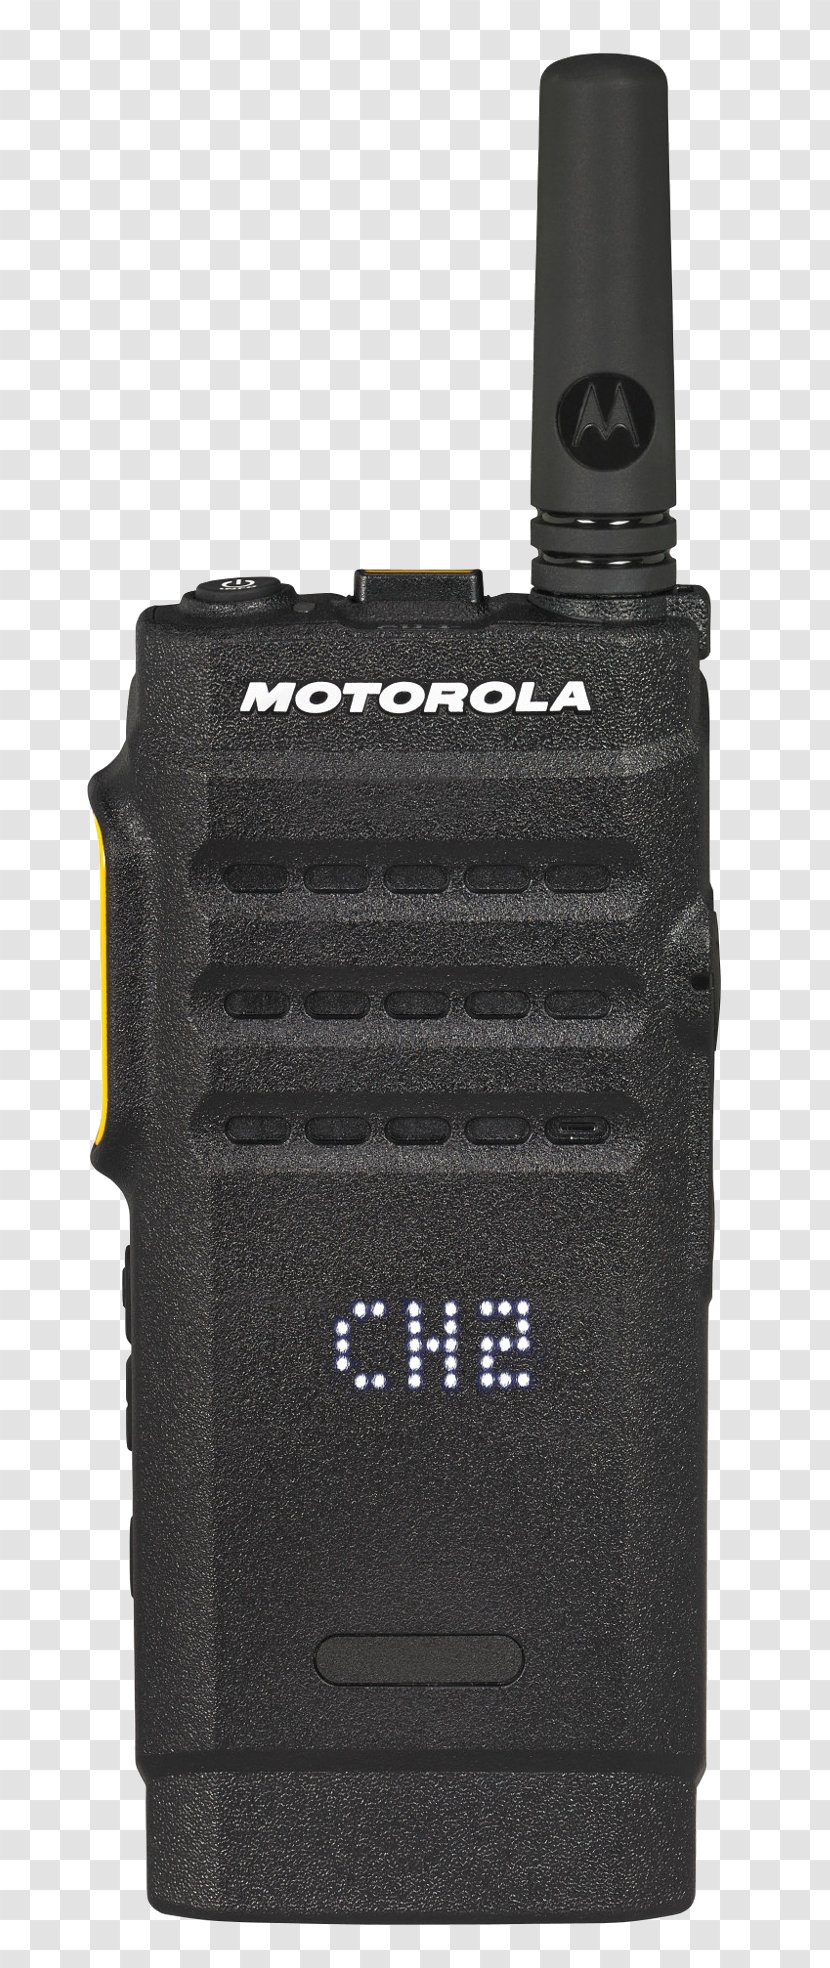 Two-way Radio Motorola SL300 Solutions Push-to-talk - Very High Frequency - Walkie Talkie Transparent PNG